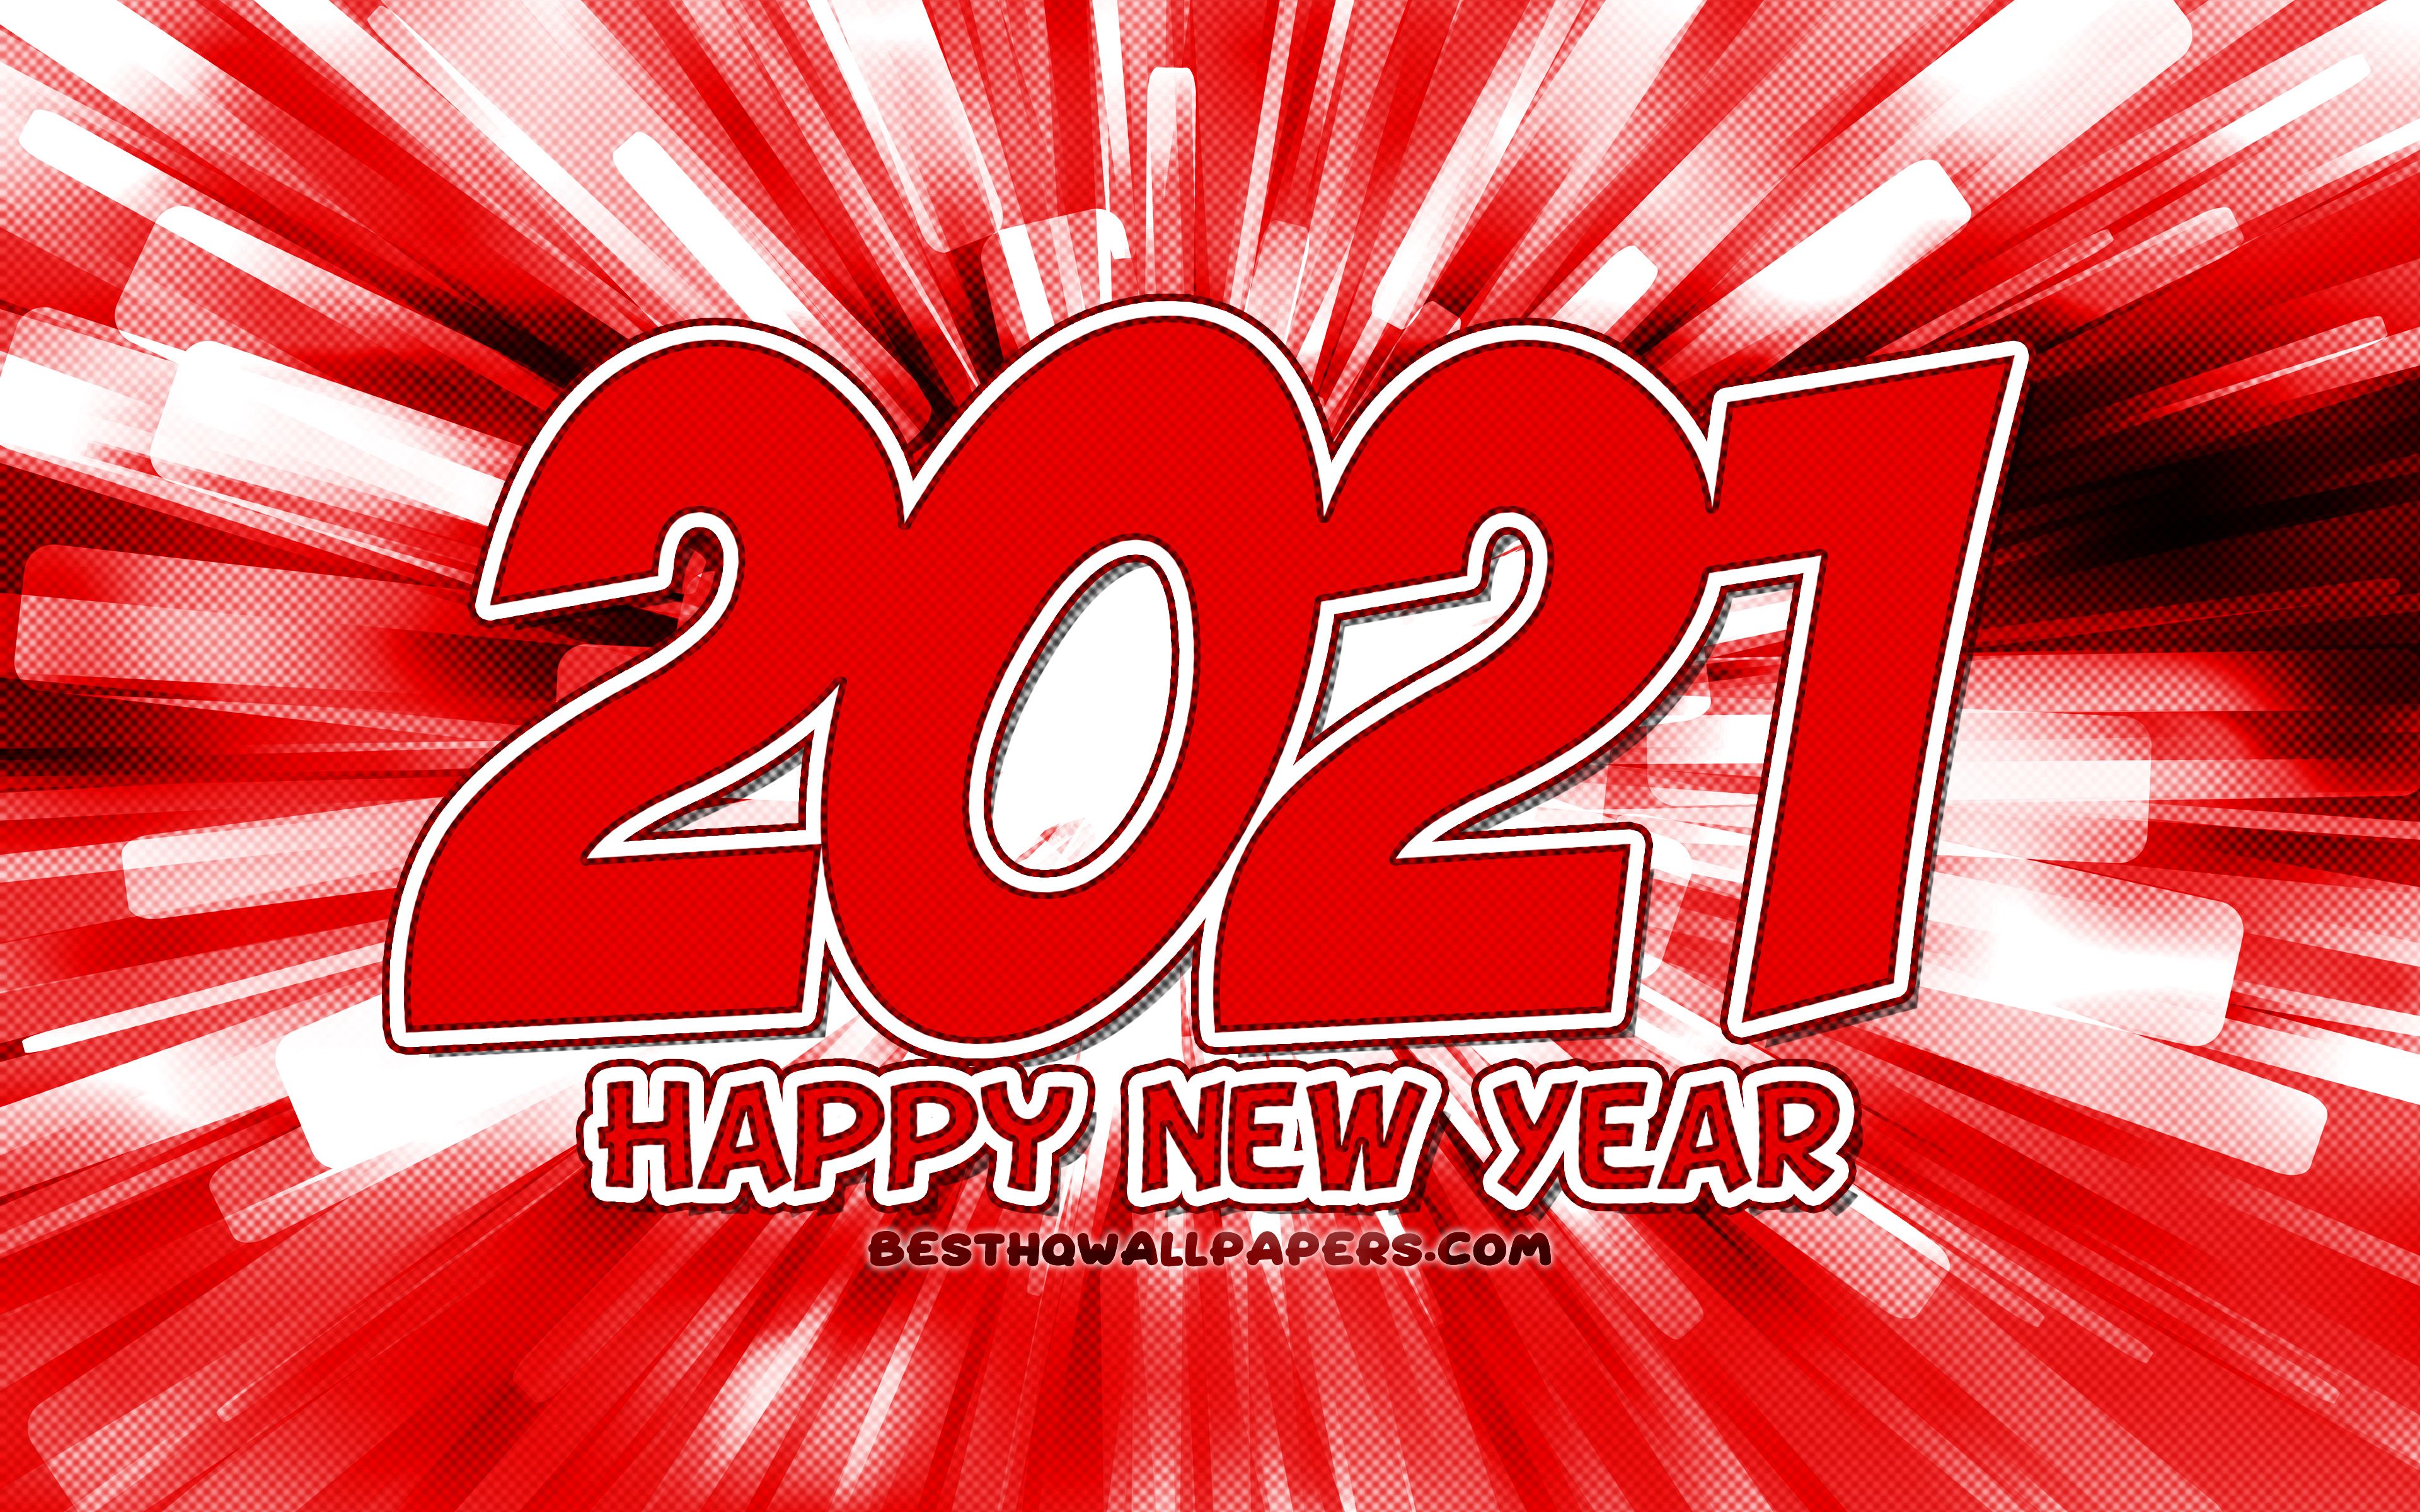 Download wallpapers Happy New Year 2021, 4k, red abstract rays, 2021 red digits, 2021 concepts, 2021 on red background, 2021 year digits for desktop with resolution 3840x2400. High Quality HD pictures wallpapers